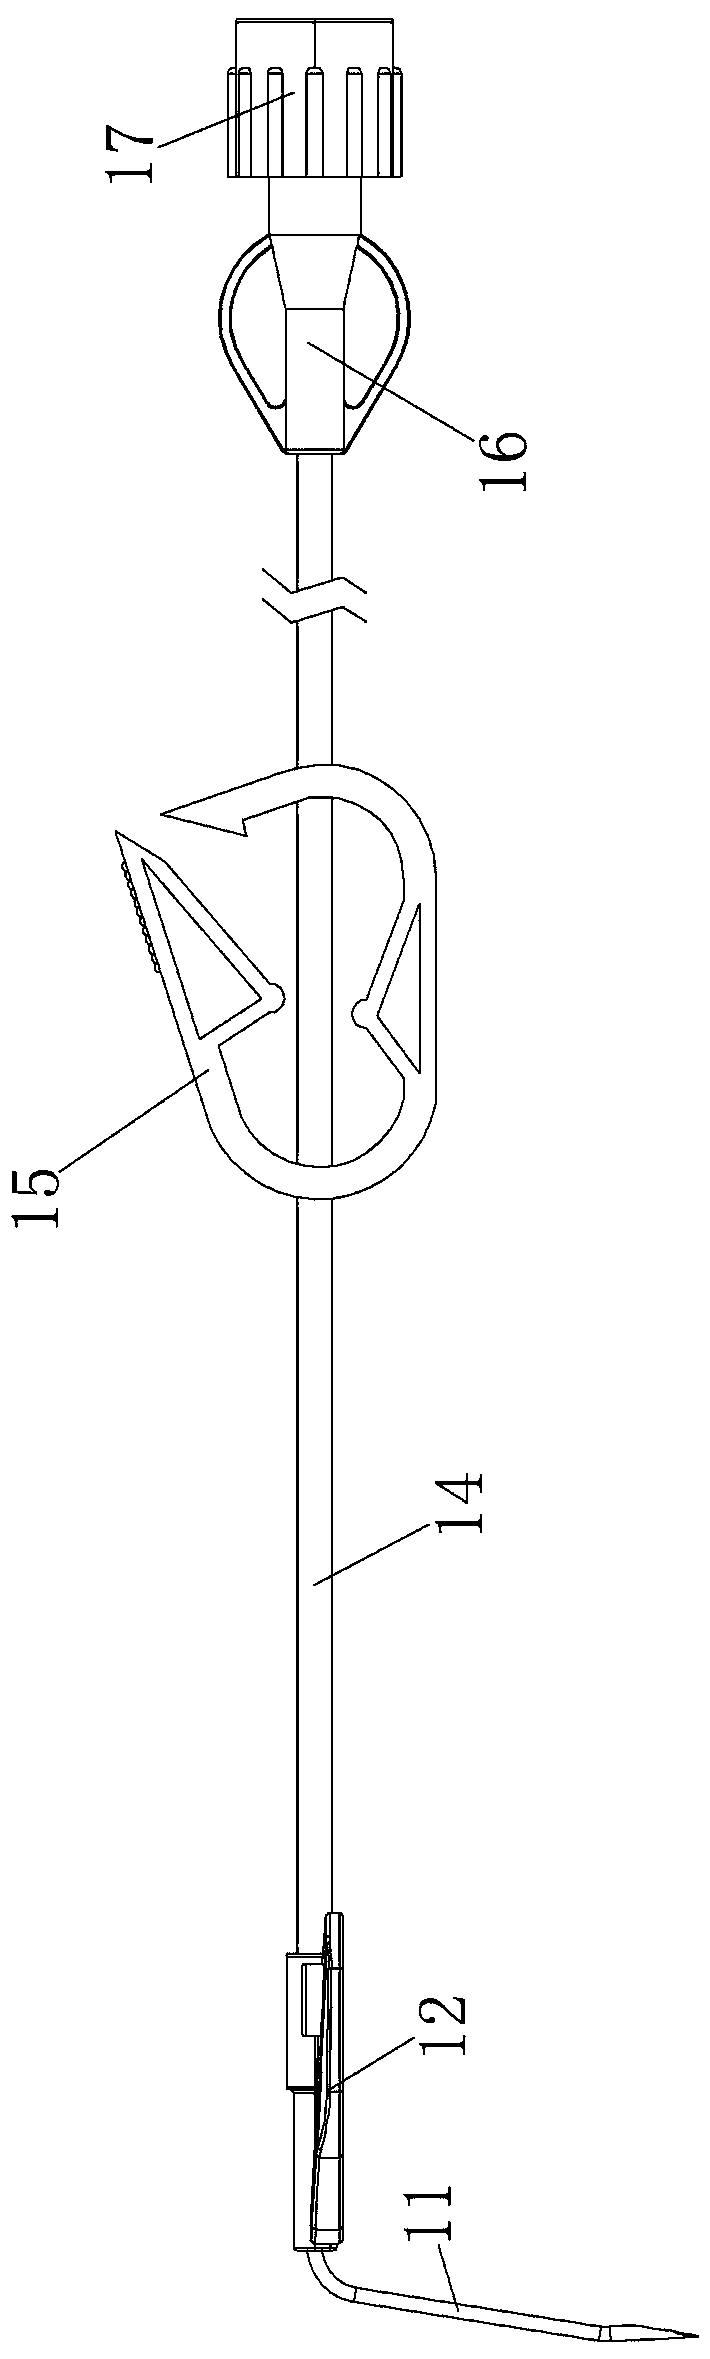 Special needle for implantable drug delivery apparatus